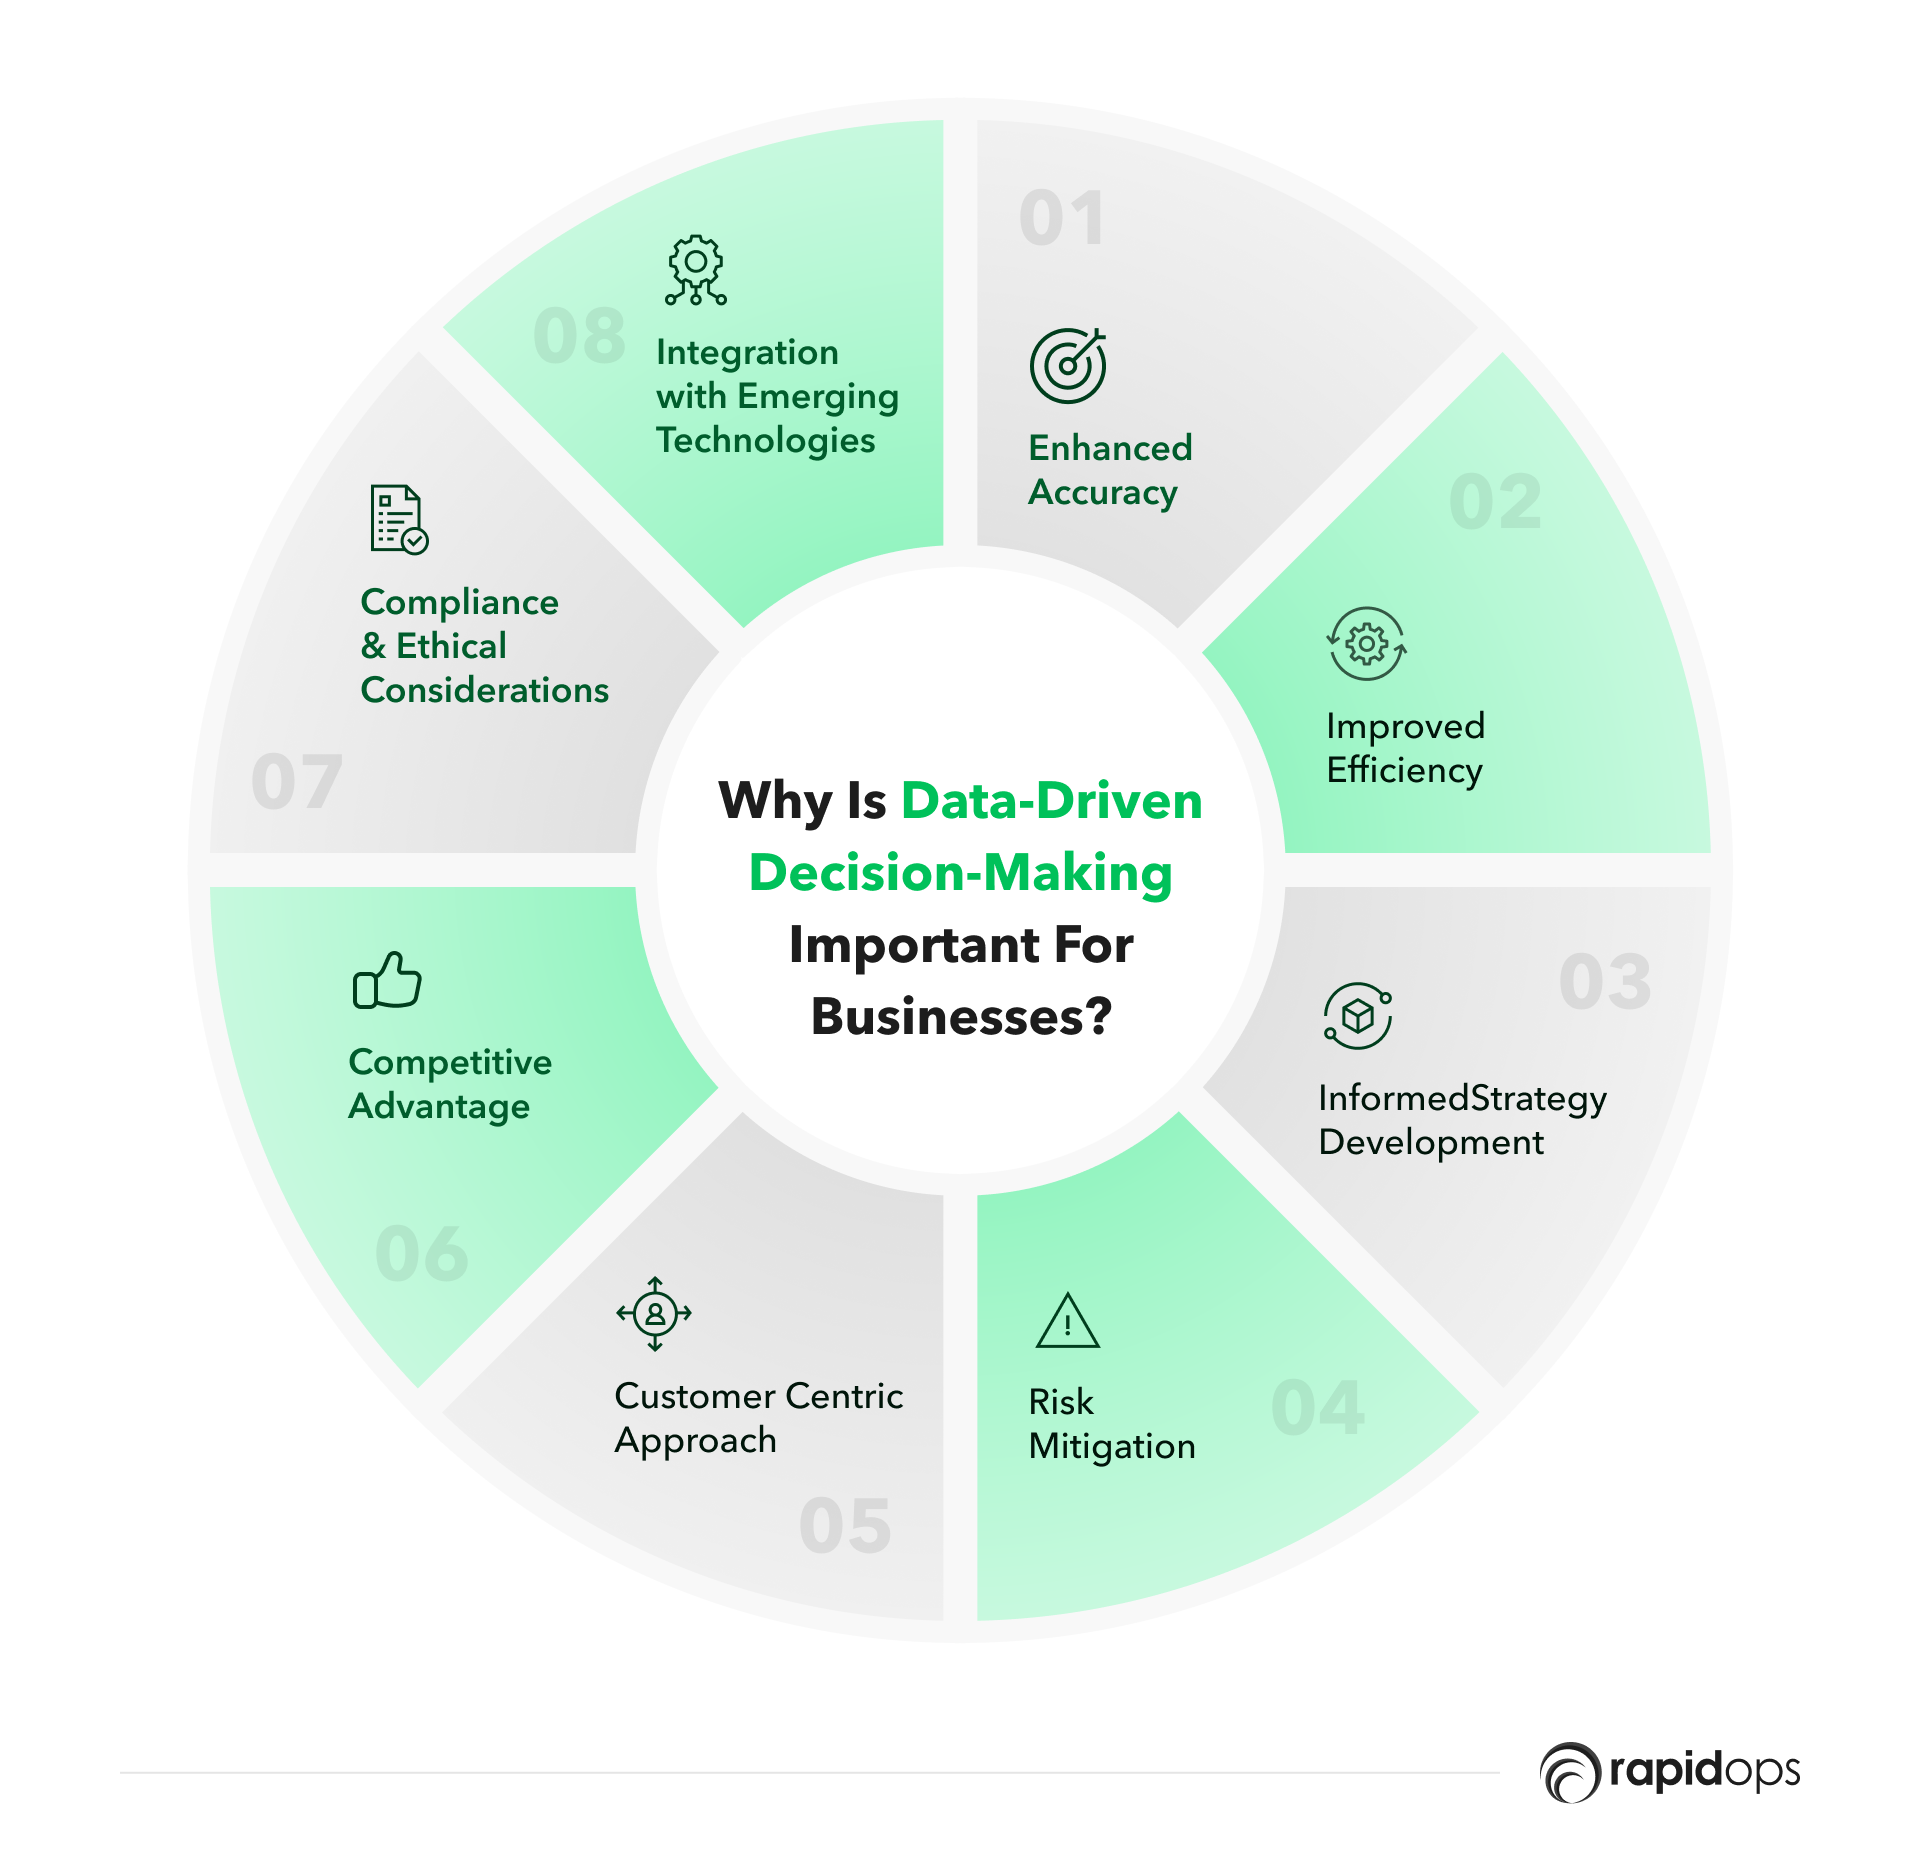 Why is data-driven decision-making (DDDM) important for businesses?